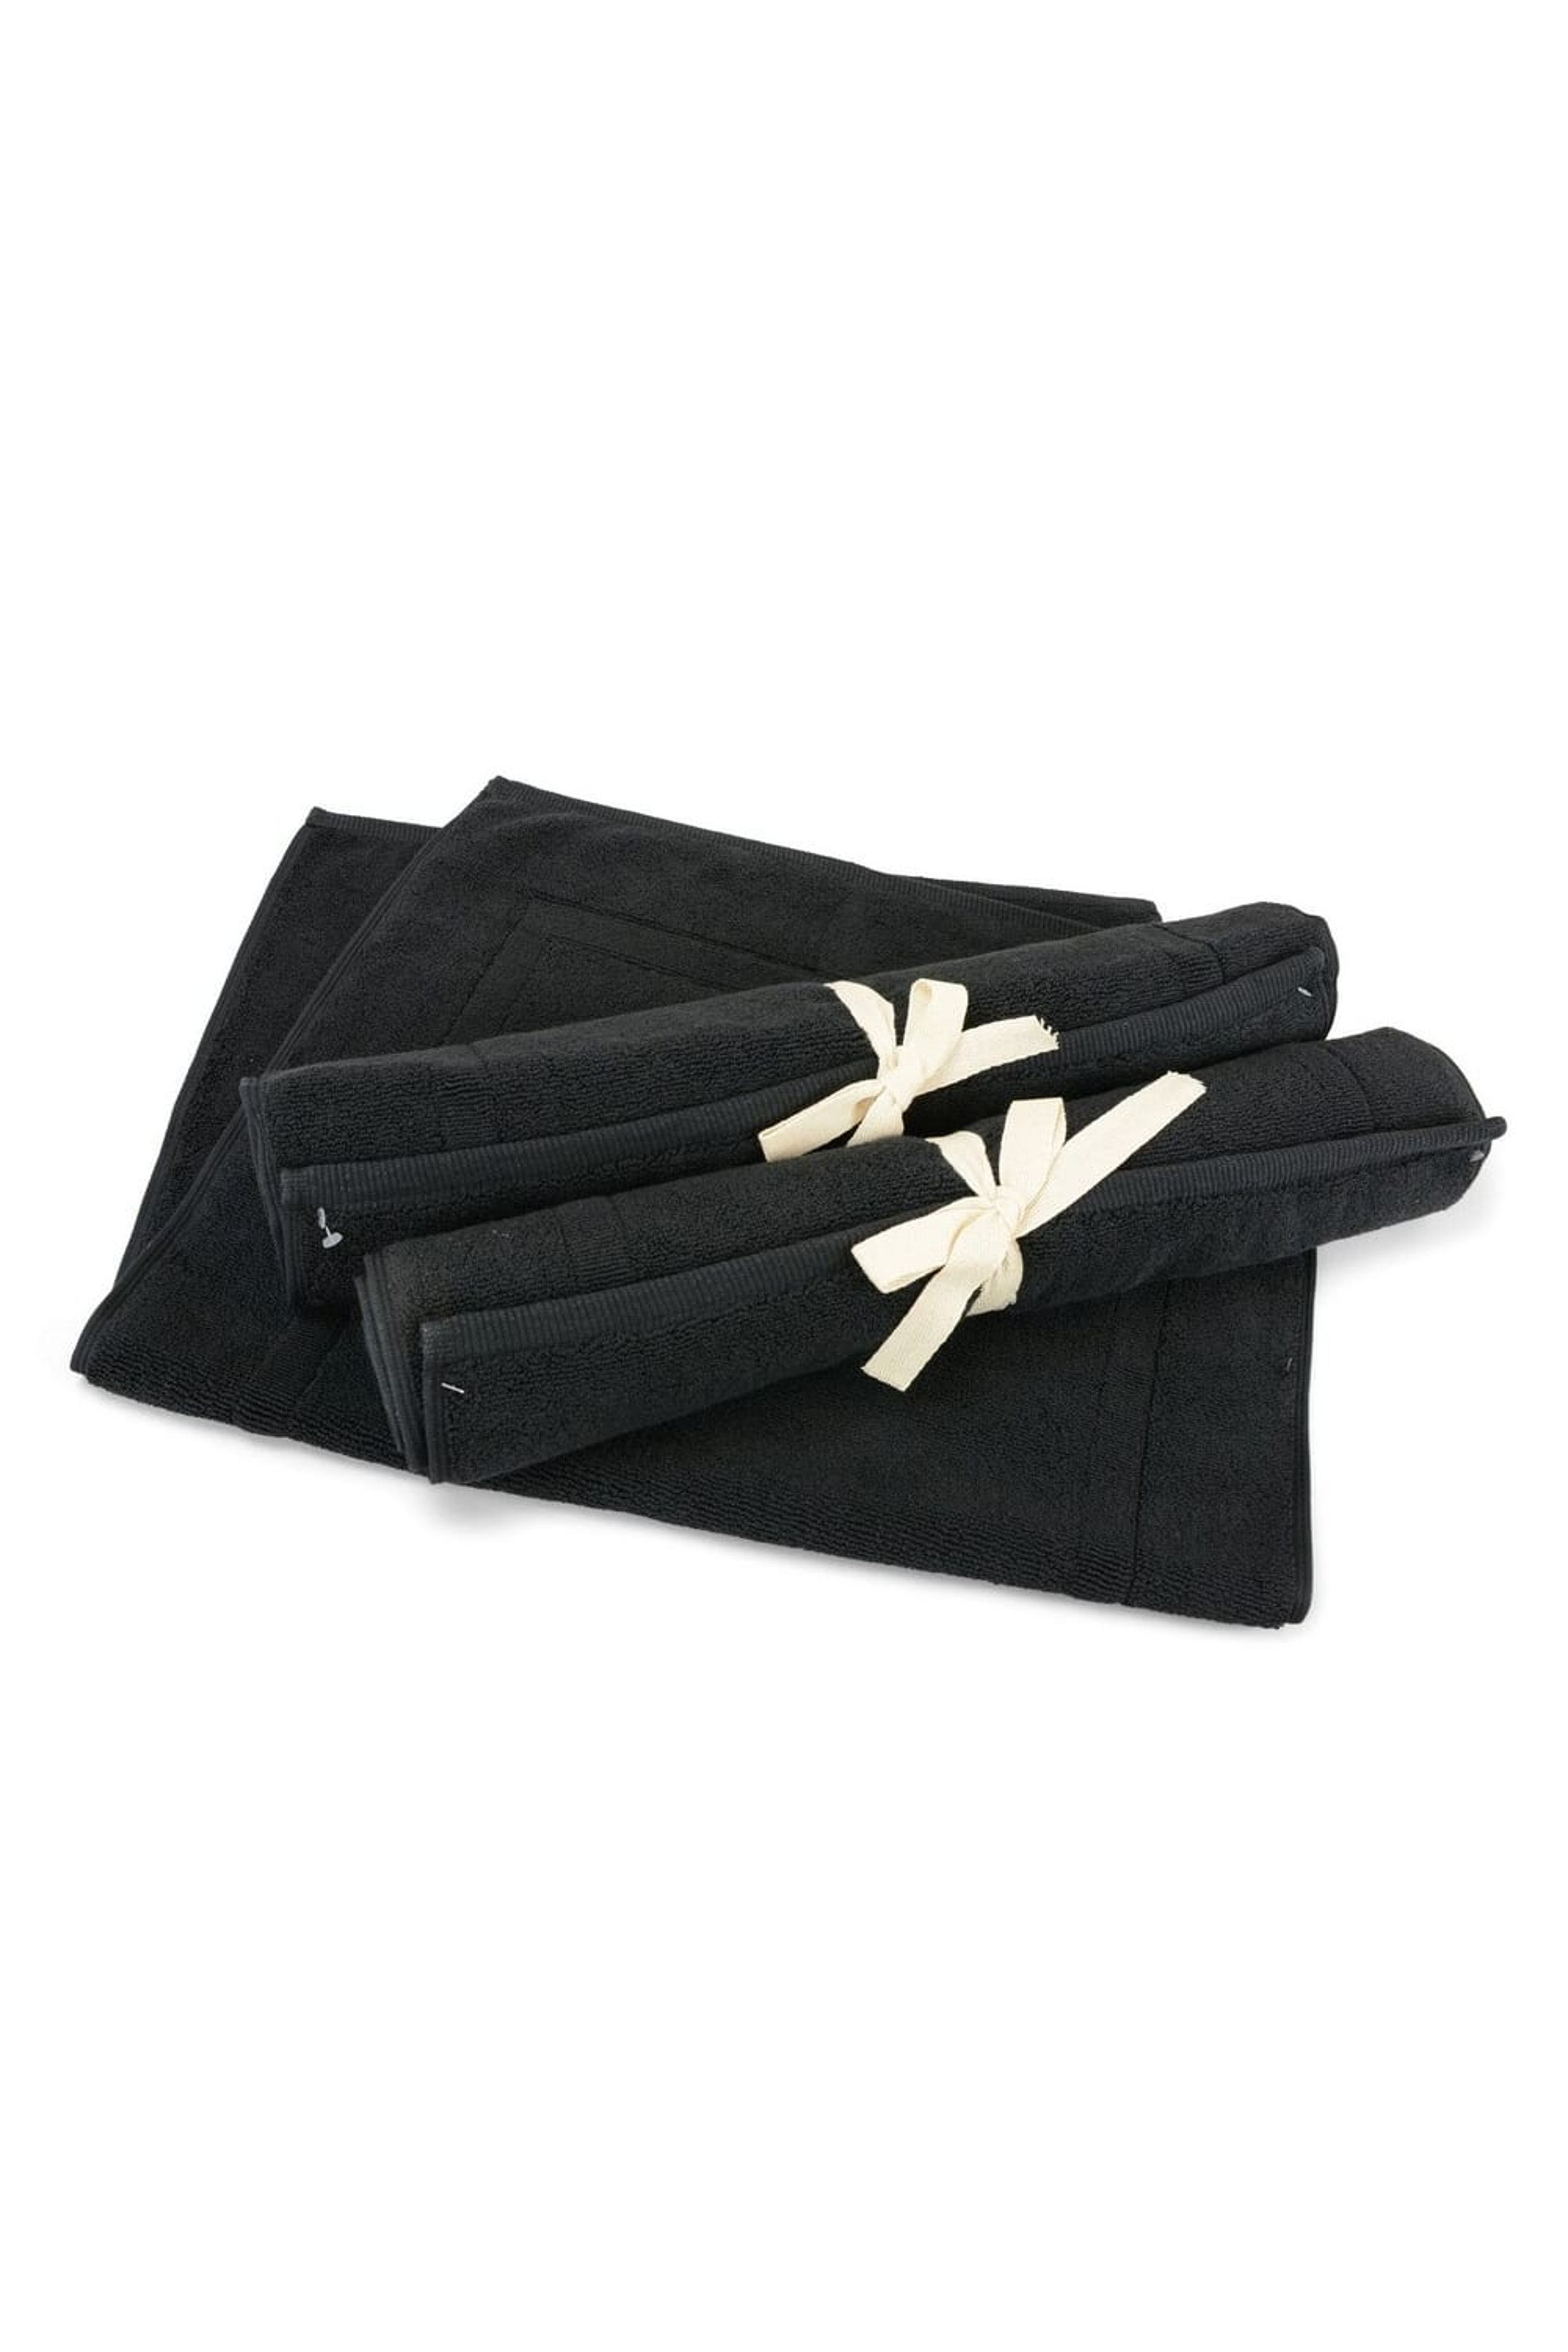 A&R TOWELS A&R TOWELS A&R TOWELS BATH MAT (BLACK) (ONE SIZE)